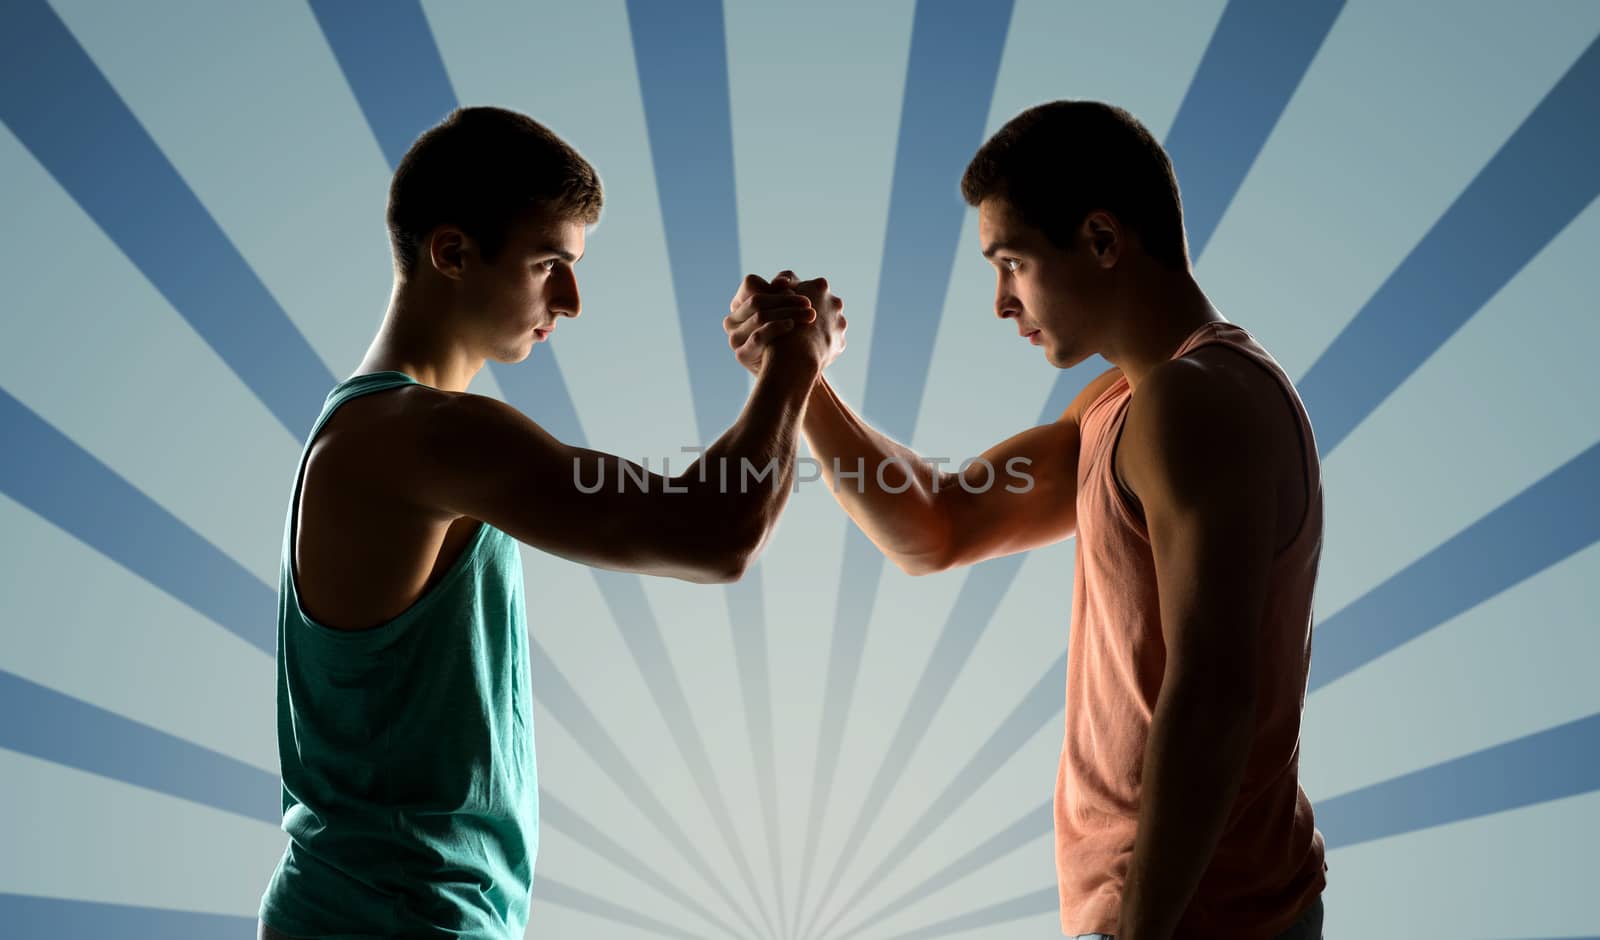 sport, competition, strength and people concept - two young men arm wrestling over blue burst rays background